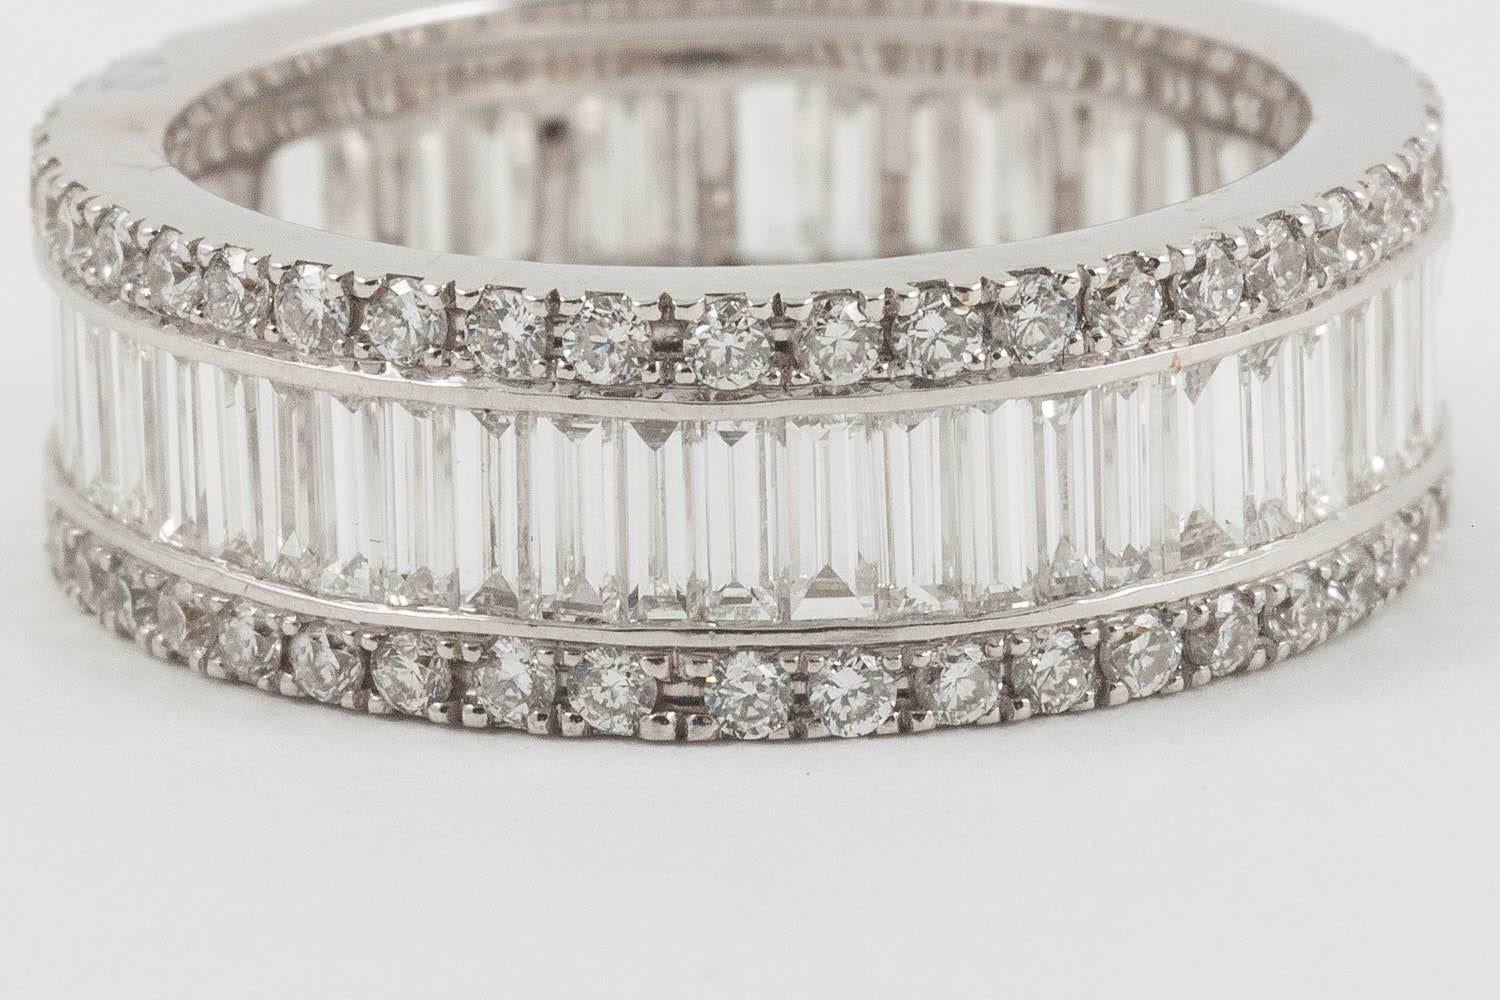 The classic Mappin and Webb triple eternity ring in UK L 1/2 (US size 5 7/8) with 3 bands of diamonds. The small round brilliant cut diamonds topping and tailing a line of baguette cut diamonds. The whole mounted in platinum. The diamonds are